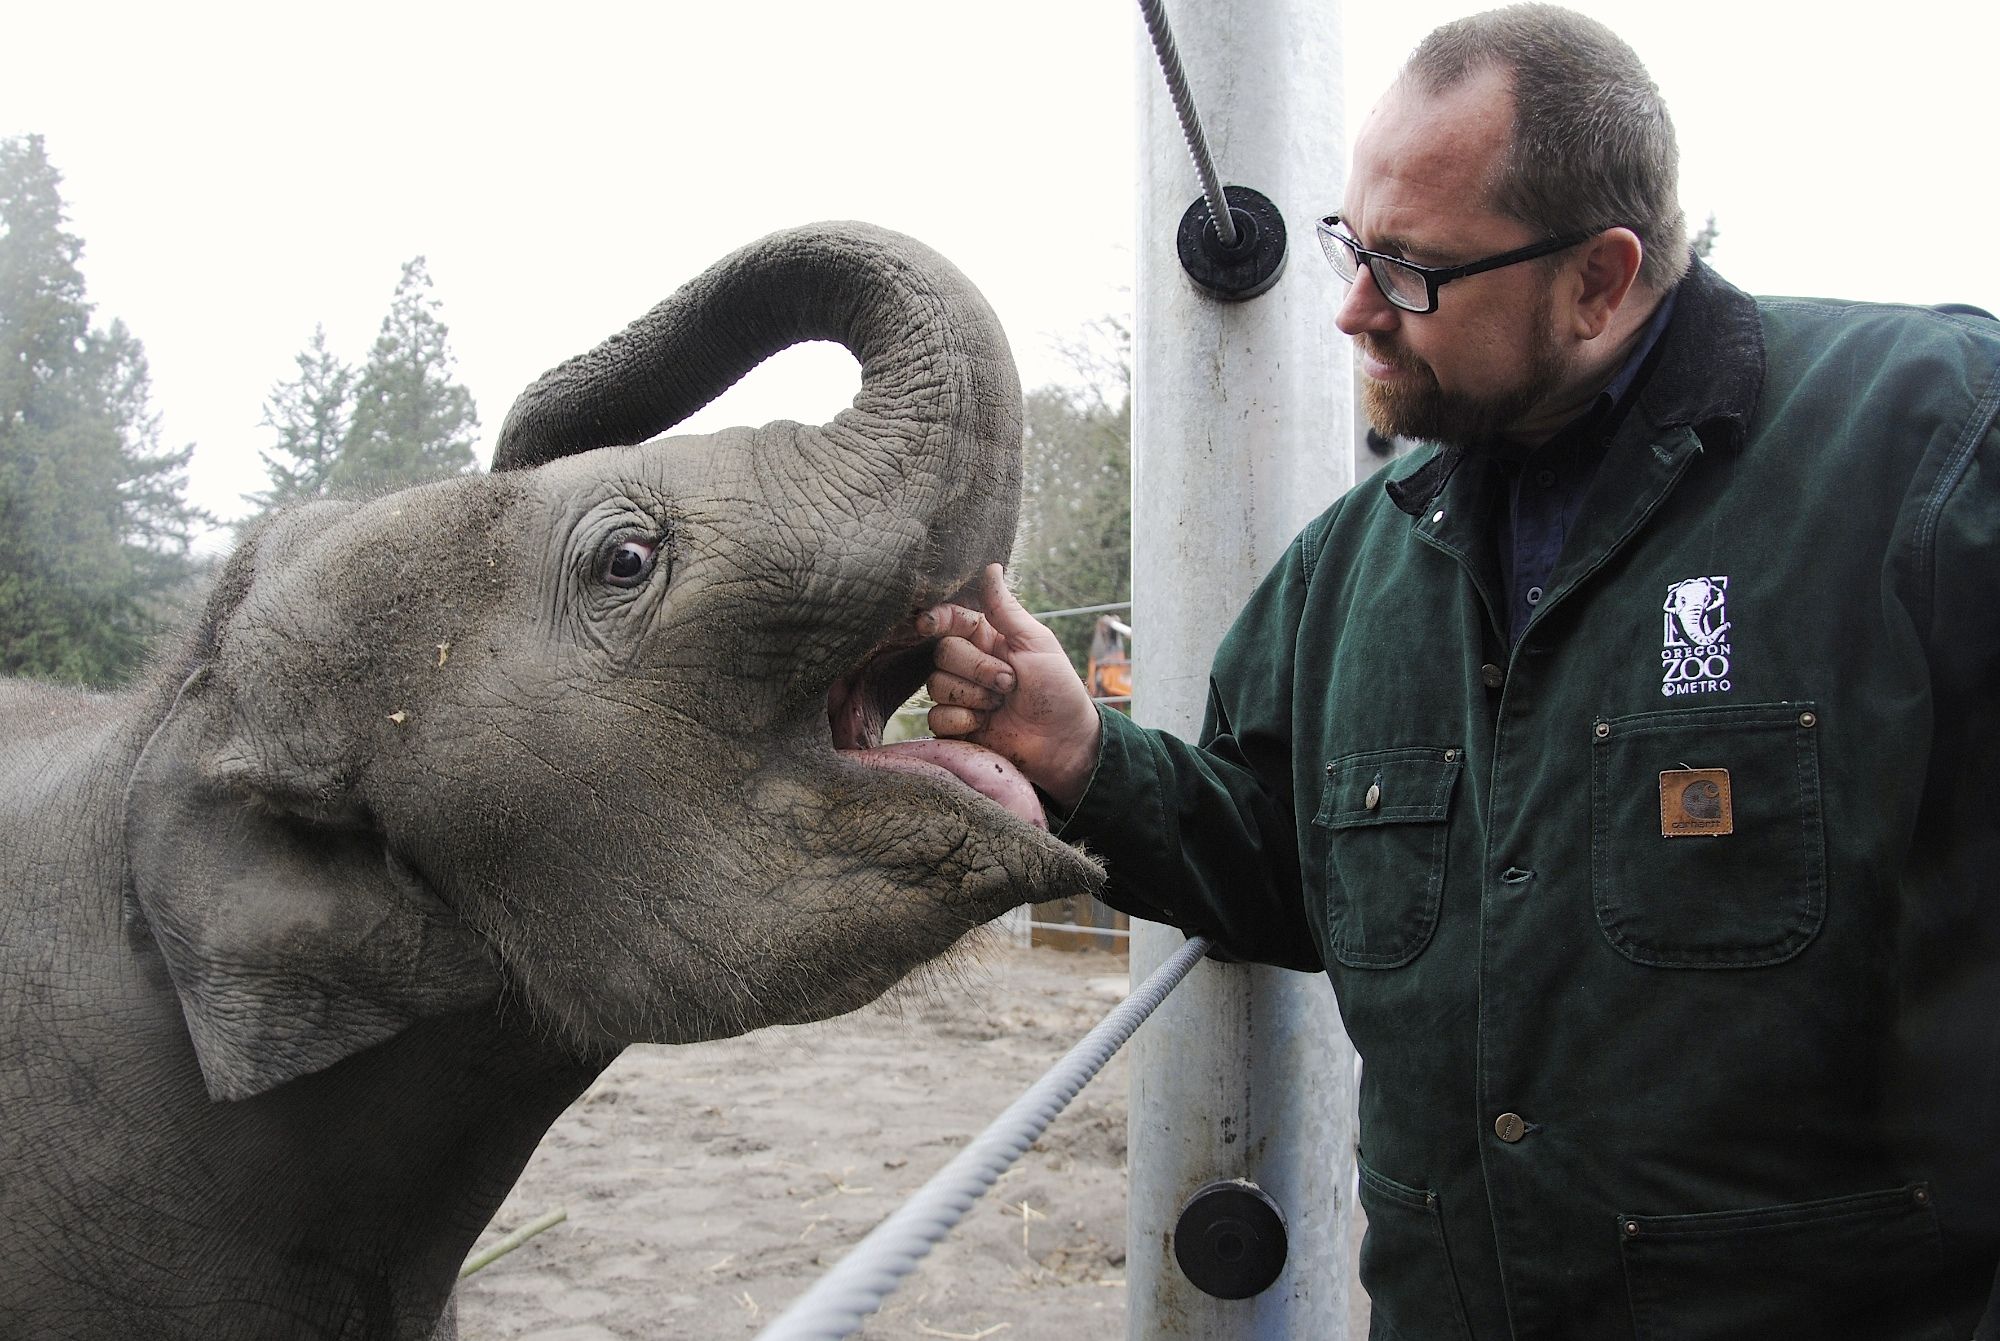 Oregon Zoo elephant curator Bob Lee strokes the bottom of Lily's trunk while the zoo's youngest Asian elephant plays in a newly unveiled portion of the Elephant Lands exhibit, due to open completely next year.